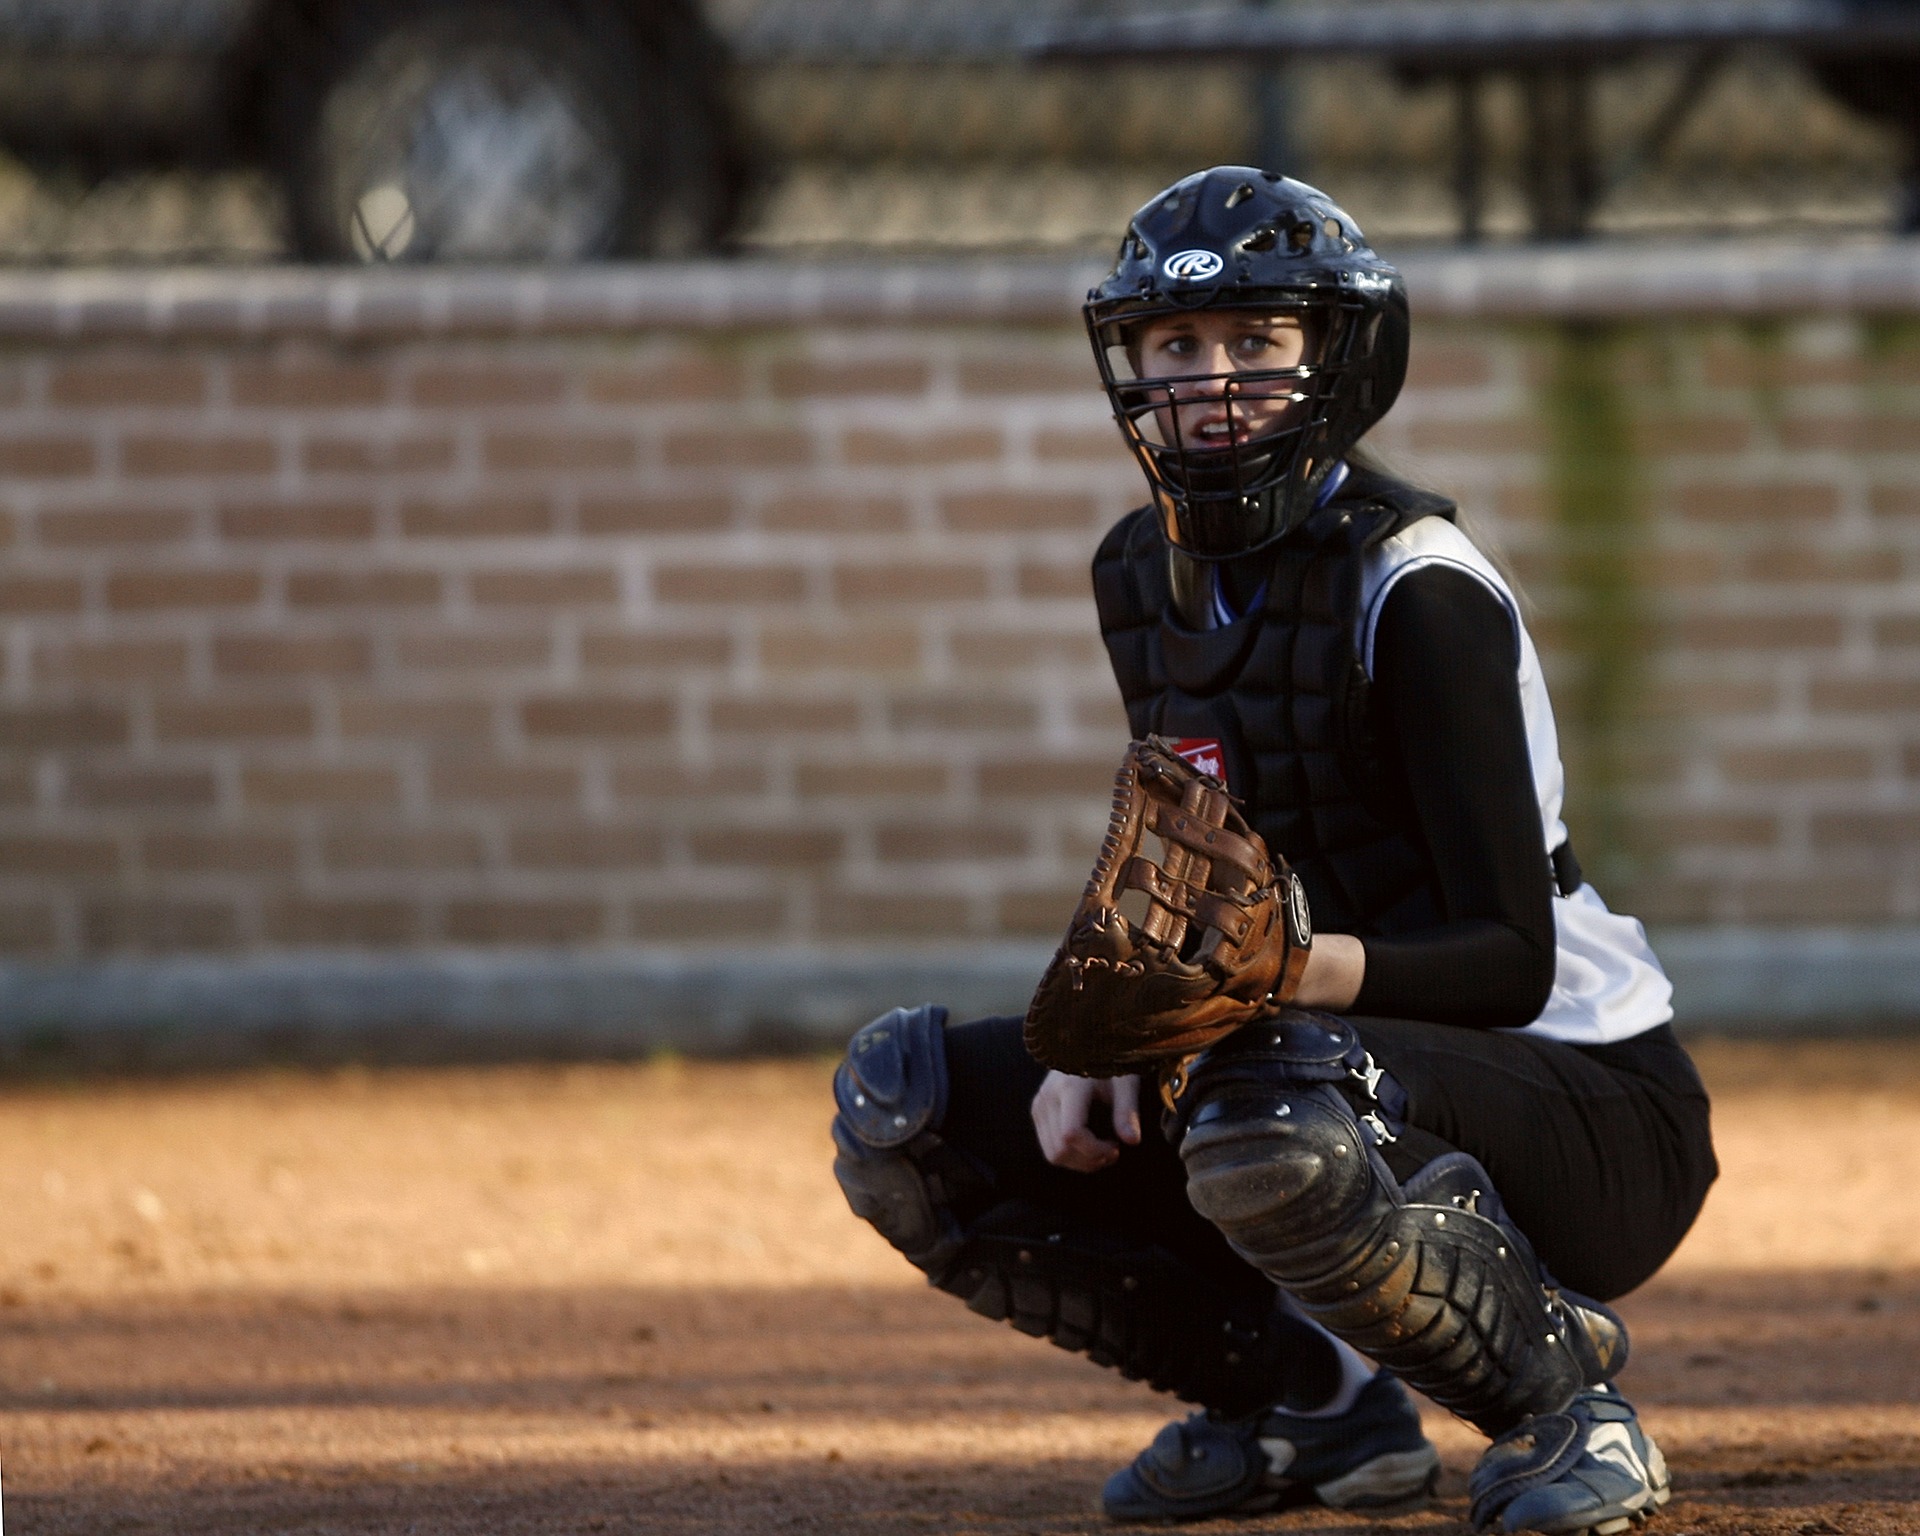 best cleats for softball catchers